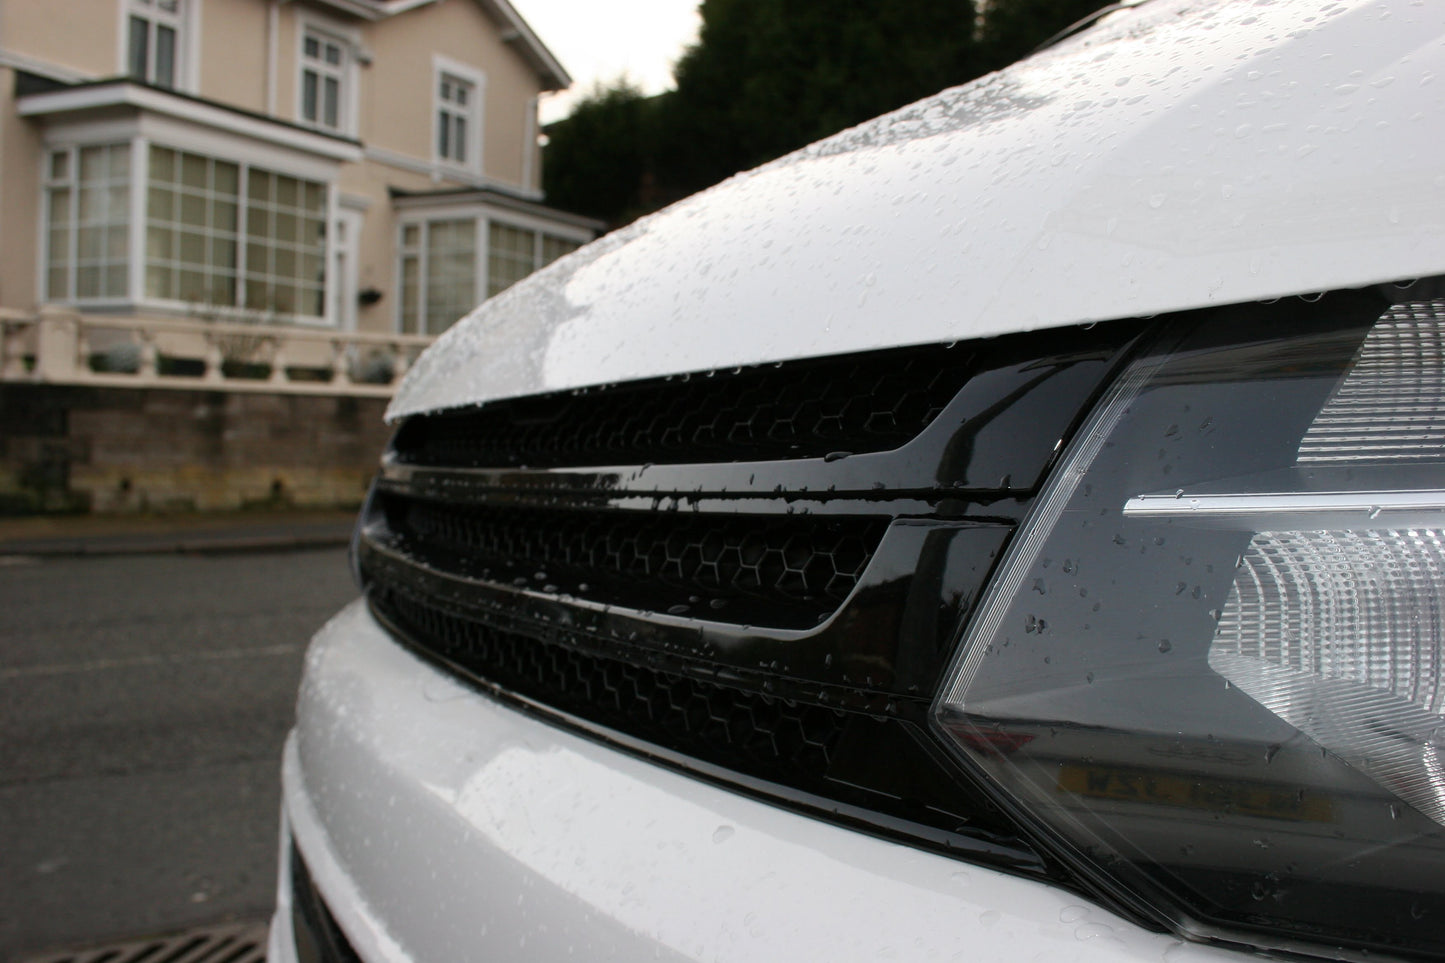 VW T5.1 Transporter Van Front Styling Gloss Black Package (3pcs) Painted and Ready to Fit